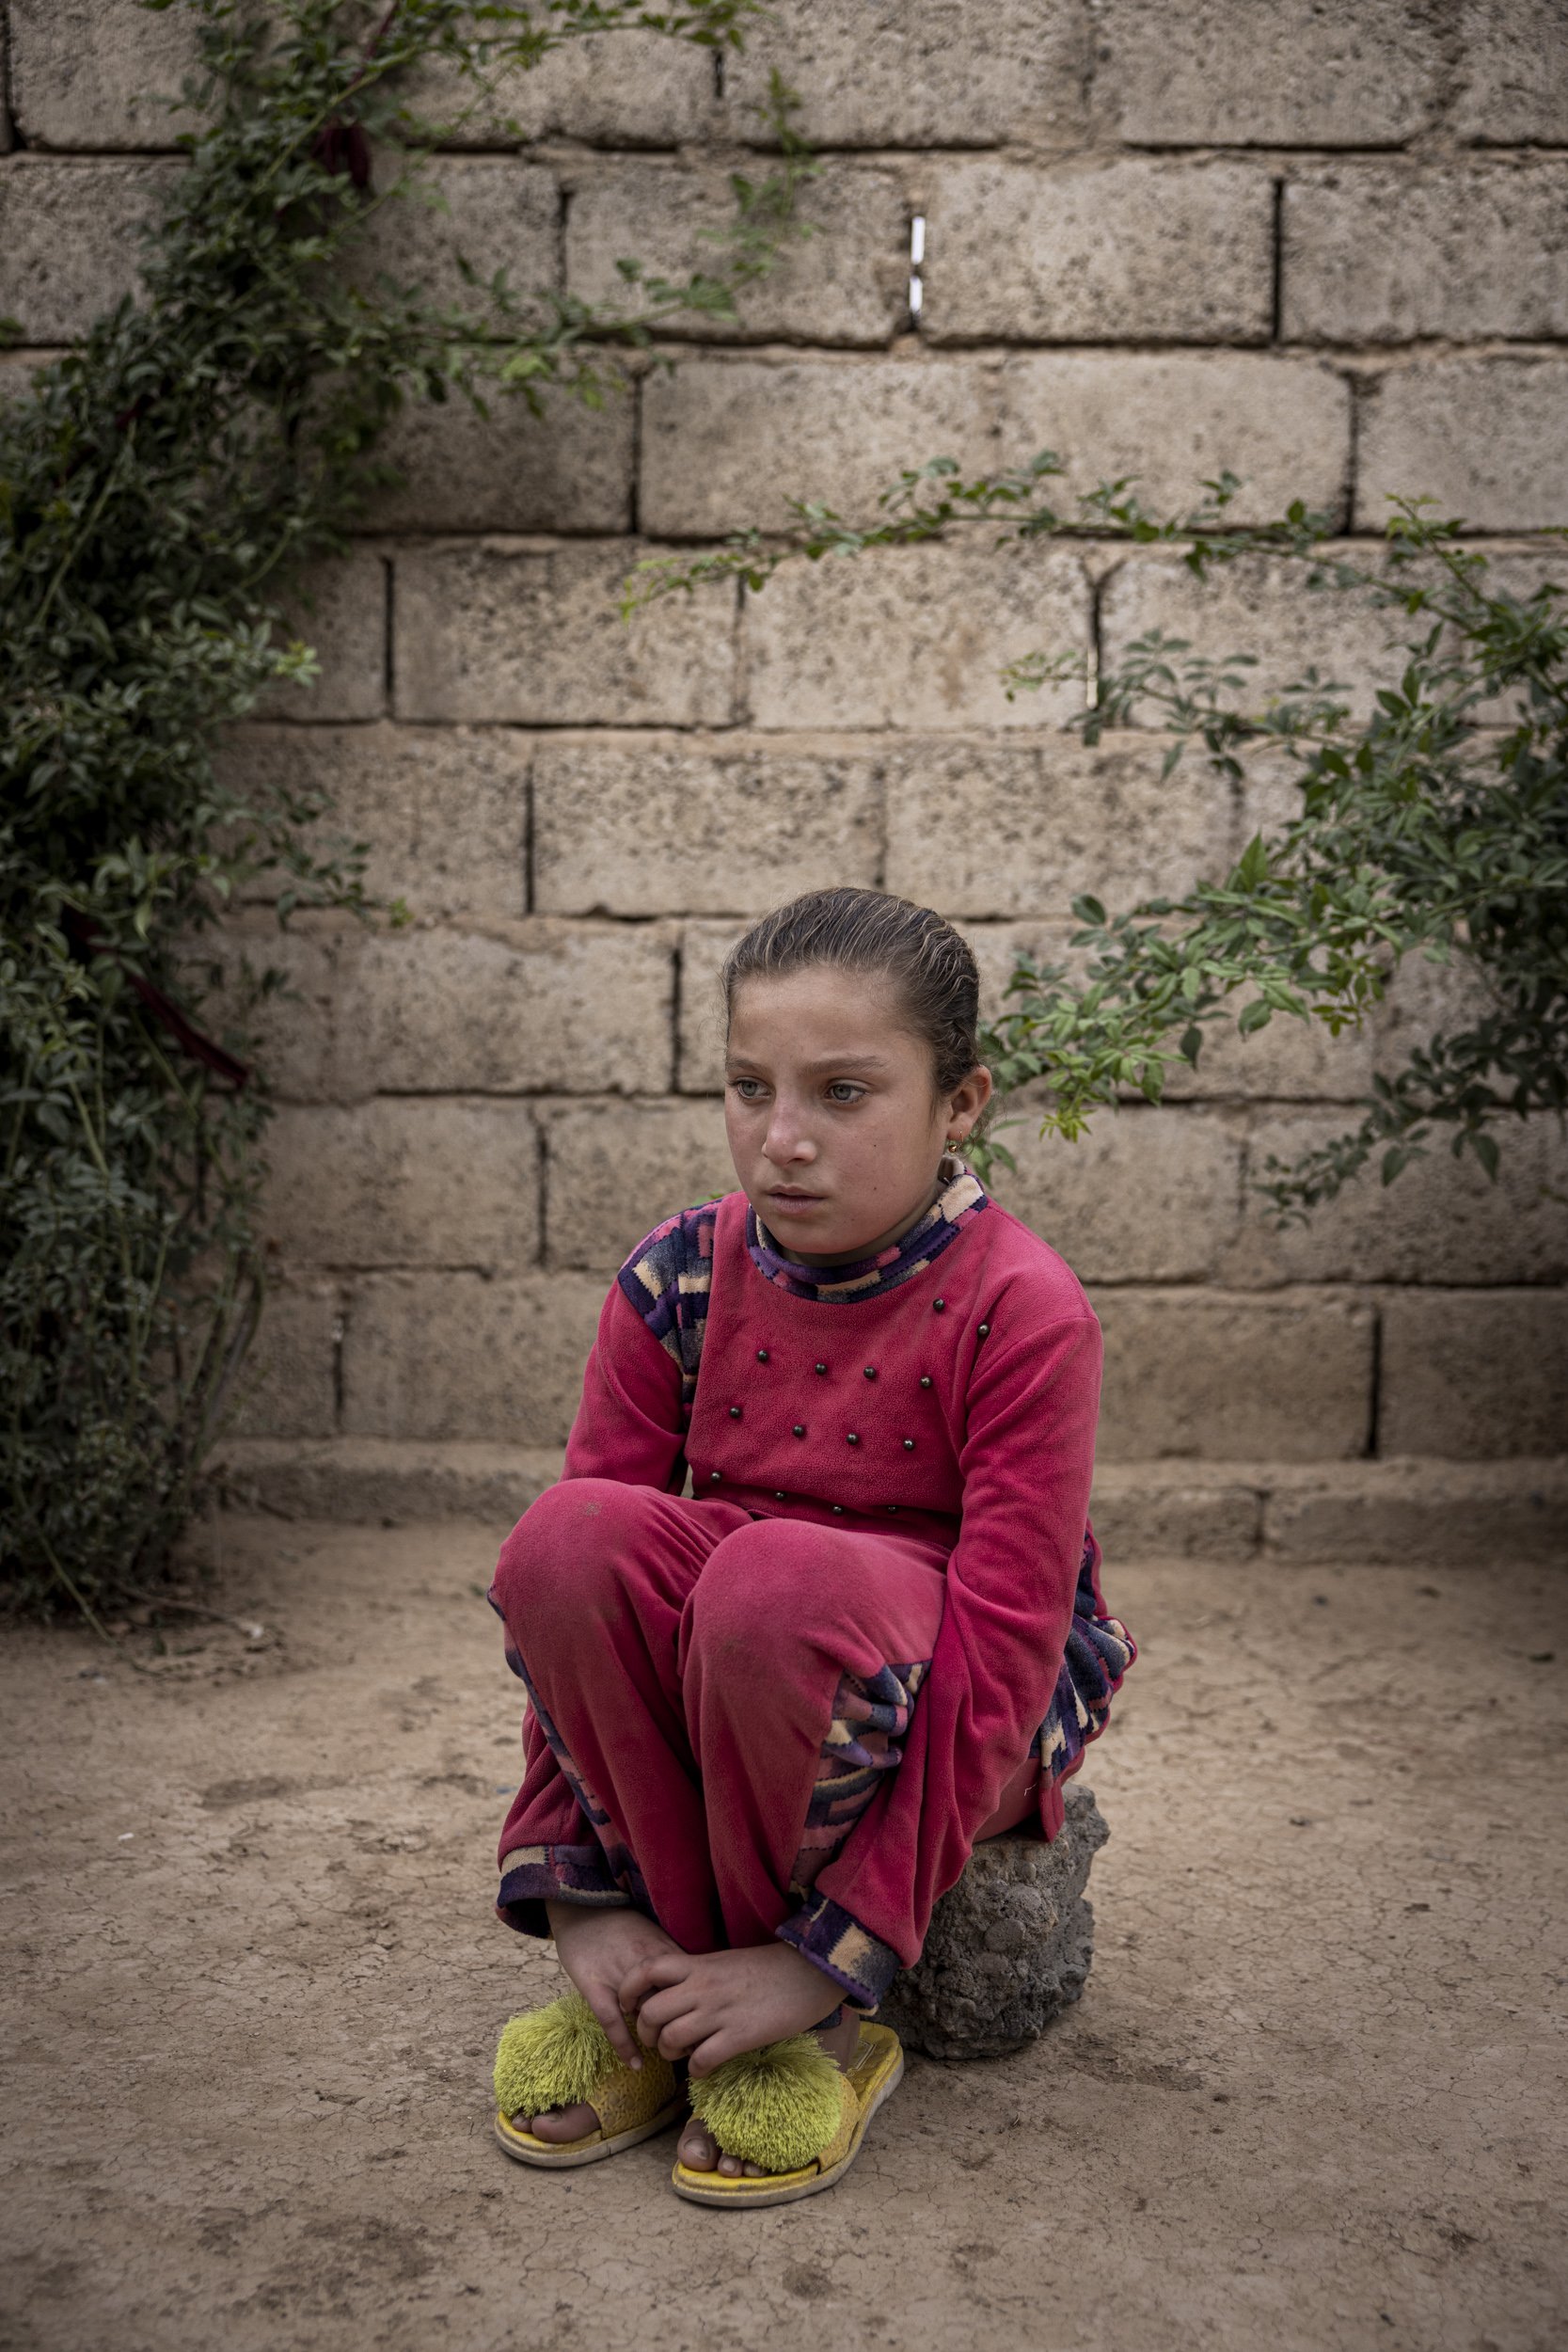  Rahaf, 10, was the sole survivor of an airstrike in Al Tanak that killed 11 members of her family. A strike in 2017 targeted a residence that military observers believed was exclusively used by ISIS fighters. 